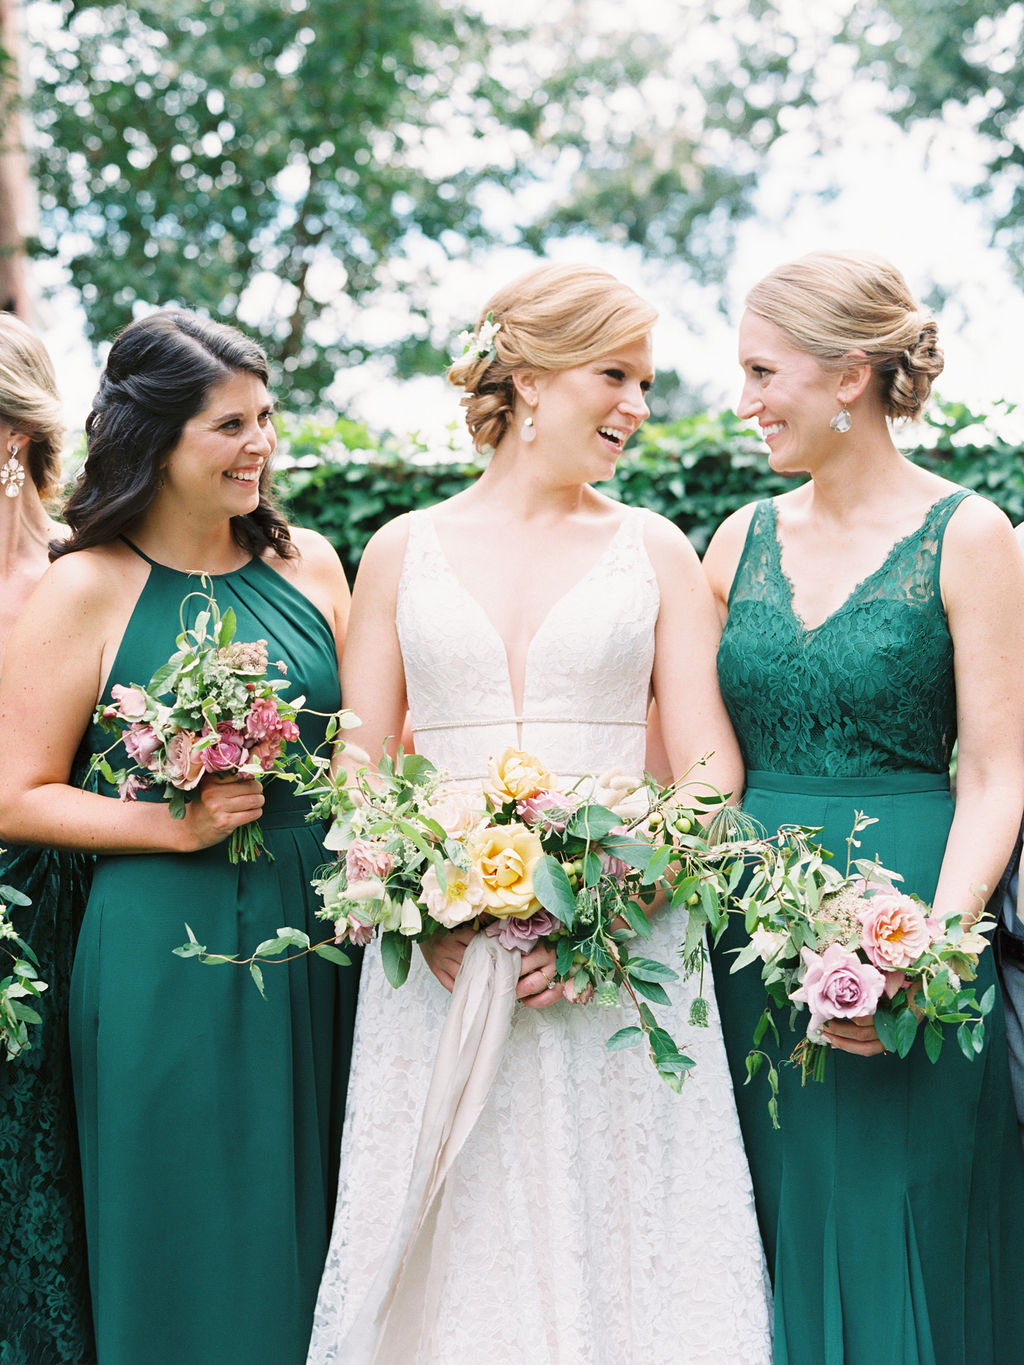 Maryland Garden Party Wedding with British Flair | Maryland Real Weddings